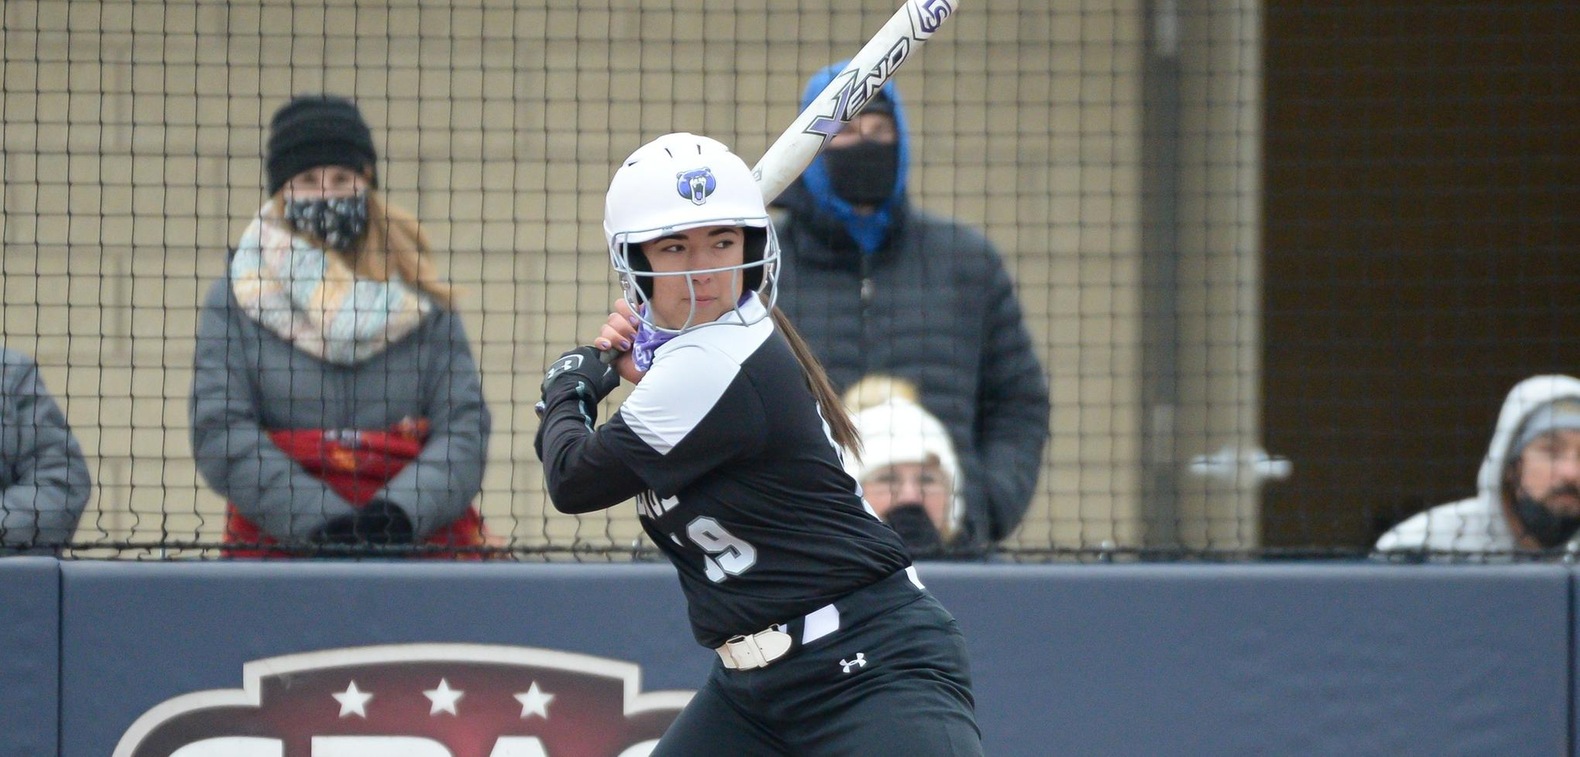 Maricela Egan went 5-for-8 with four home runs and nine RBIs on the day.